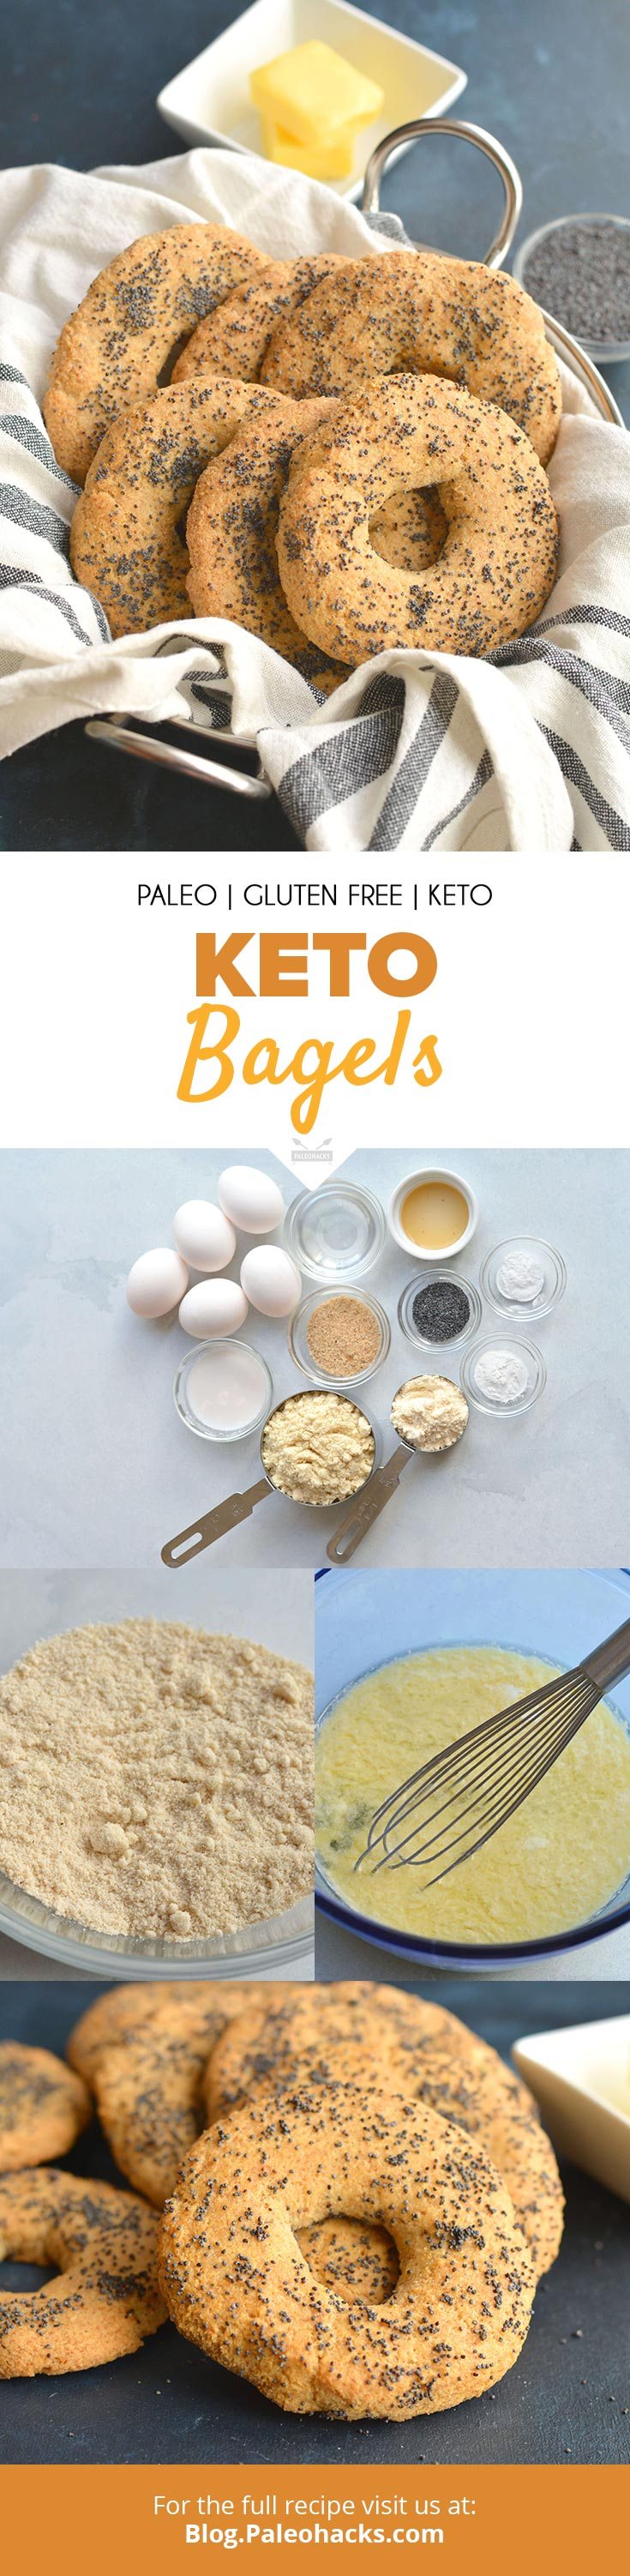 Missing bagels for breakfast? Try these gluten-free Keto Bagels made with wholesome ingredients and tons of healthy fats.